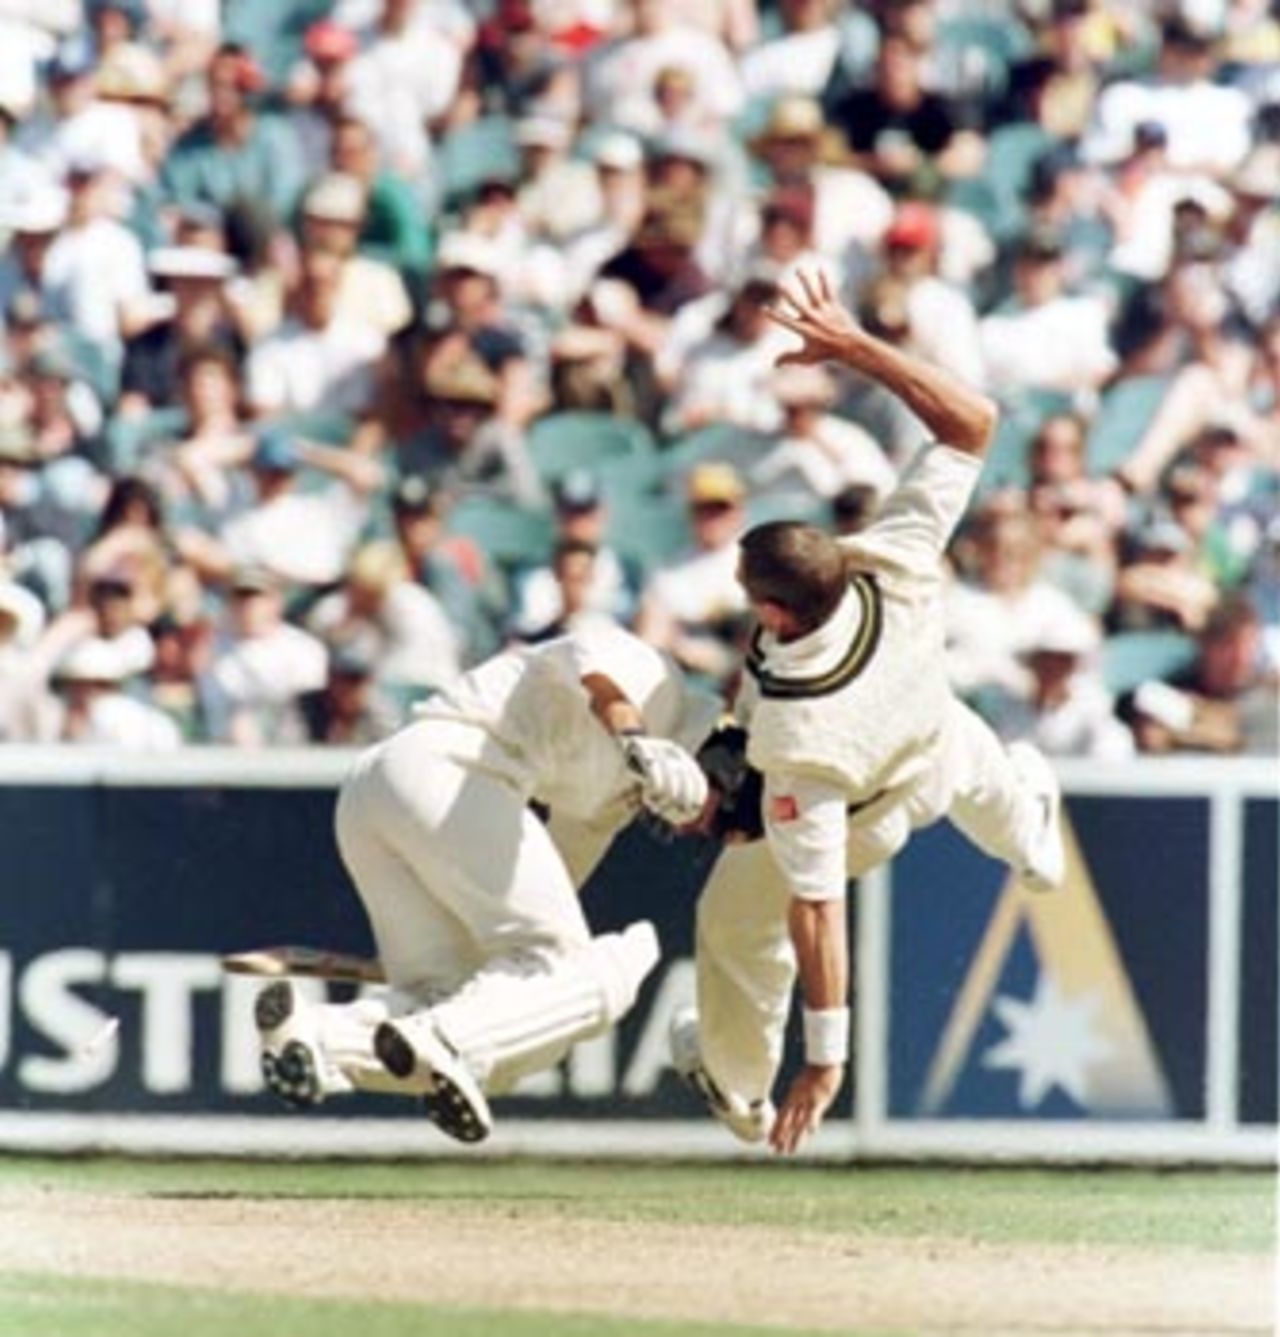 Ricky Ponting and Pat Symcox collide during the 1st day of the 1st Test between Australia and South Africa at the MCG. December 26th 1997.